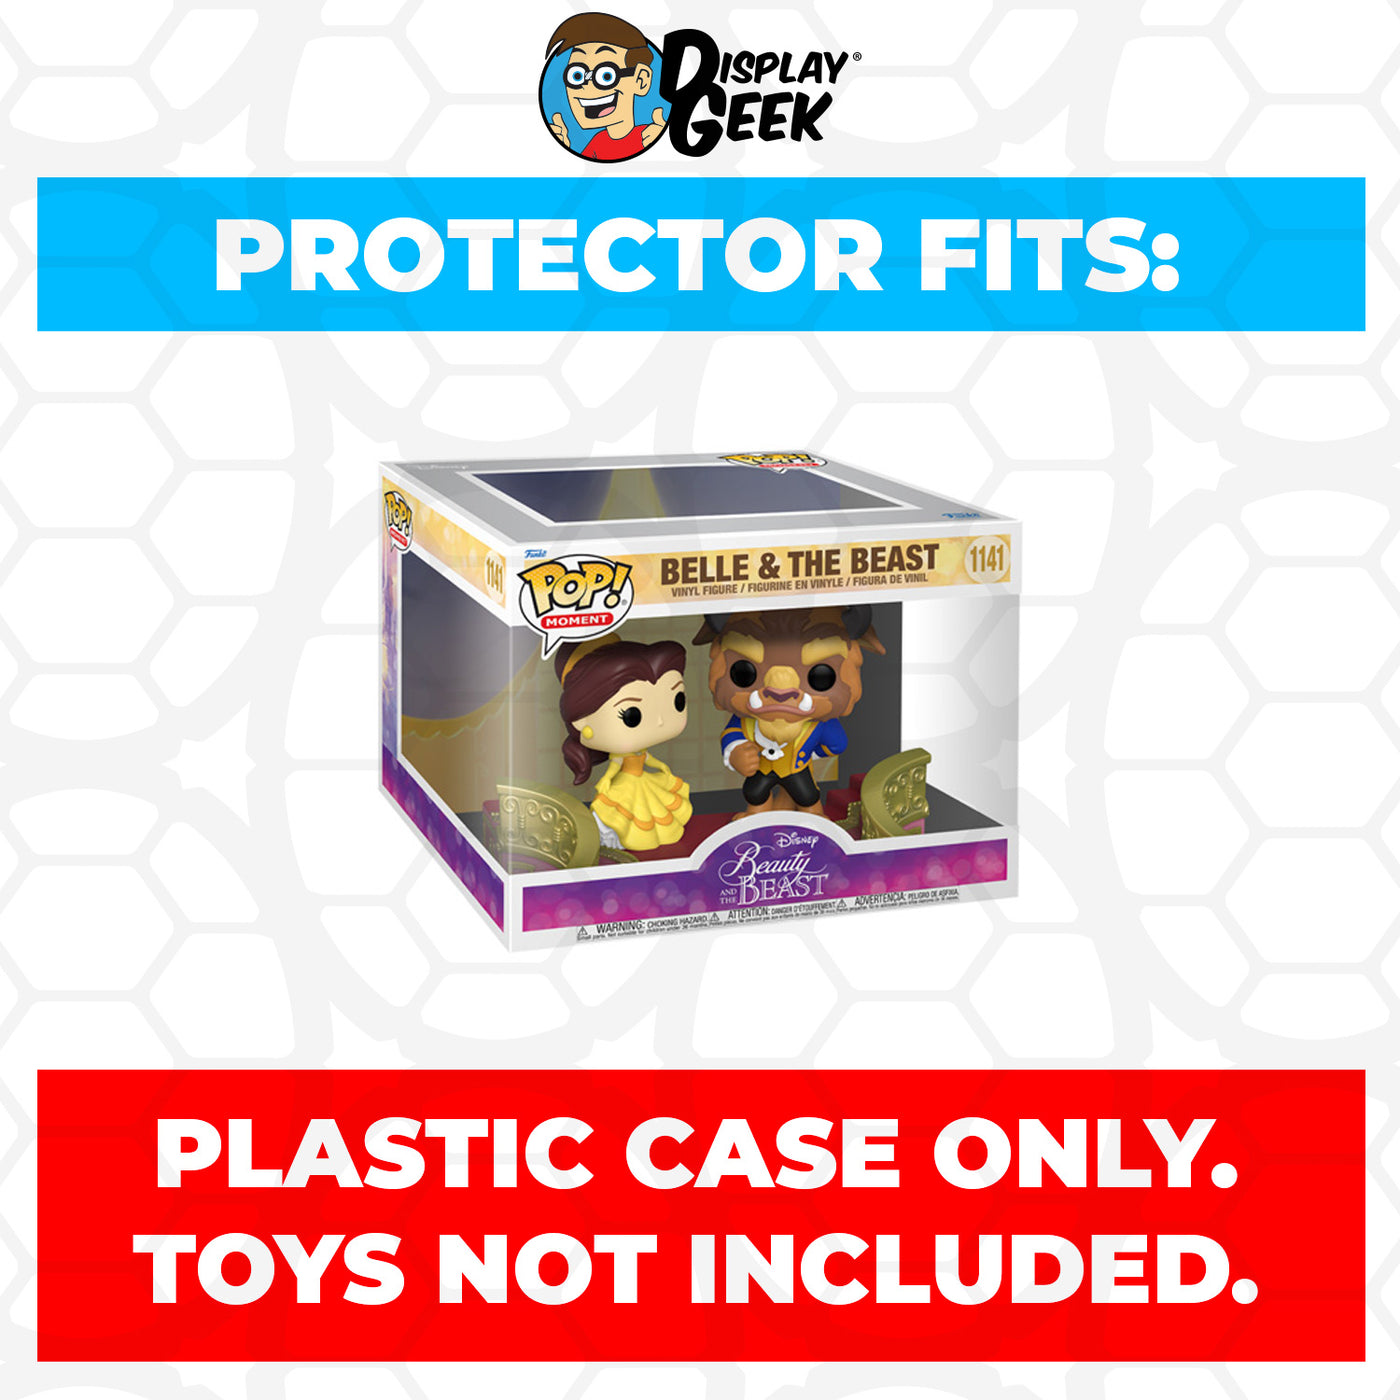 Pop Protector for Belle & the Beast #1141 Funko Pop Moment on The Protector Guide App by Display Geek